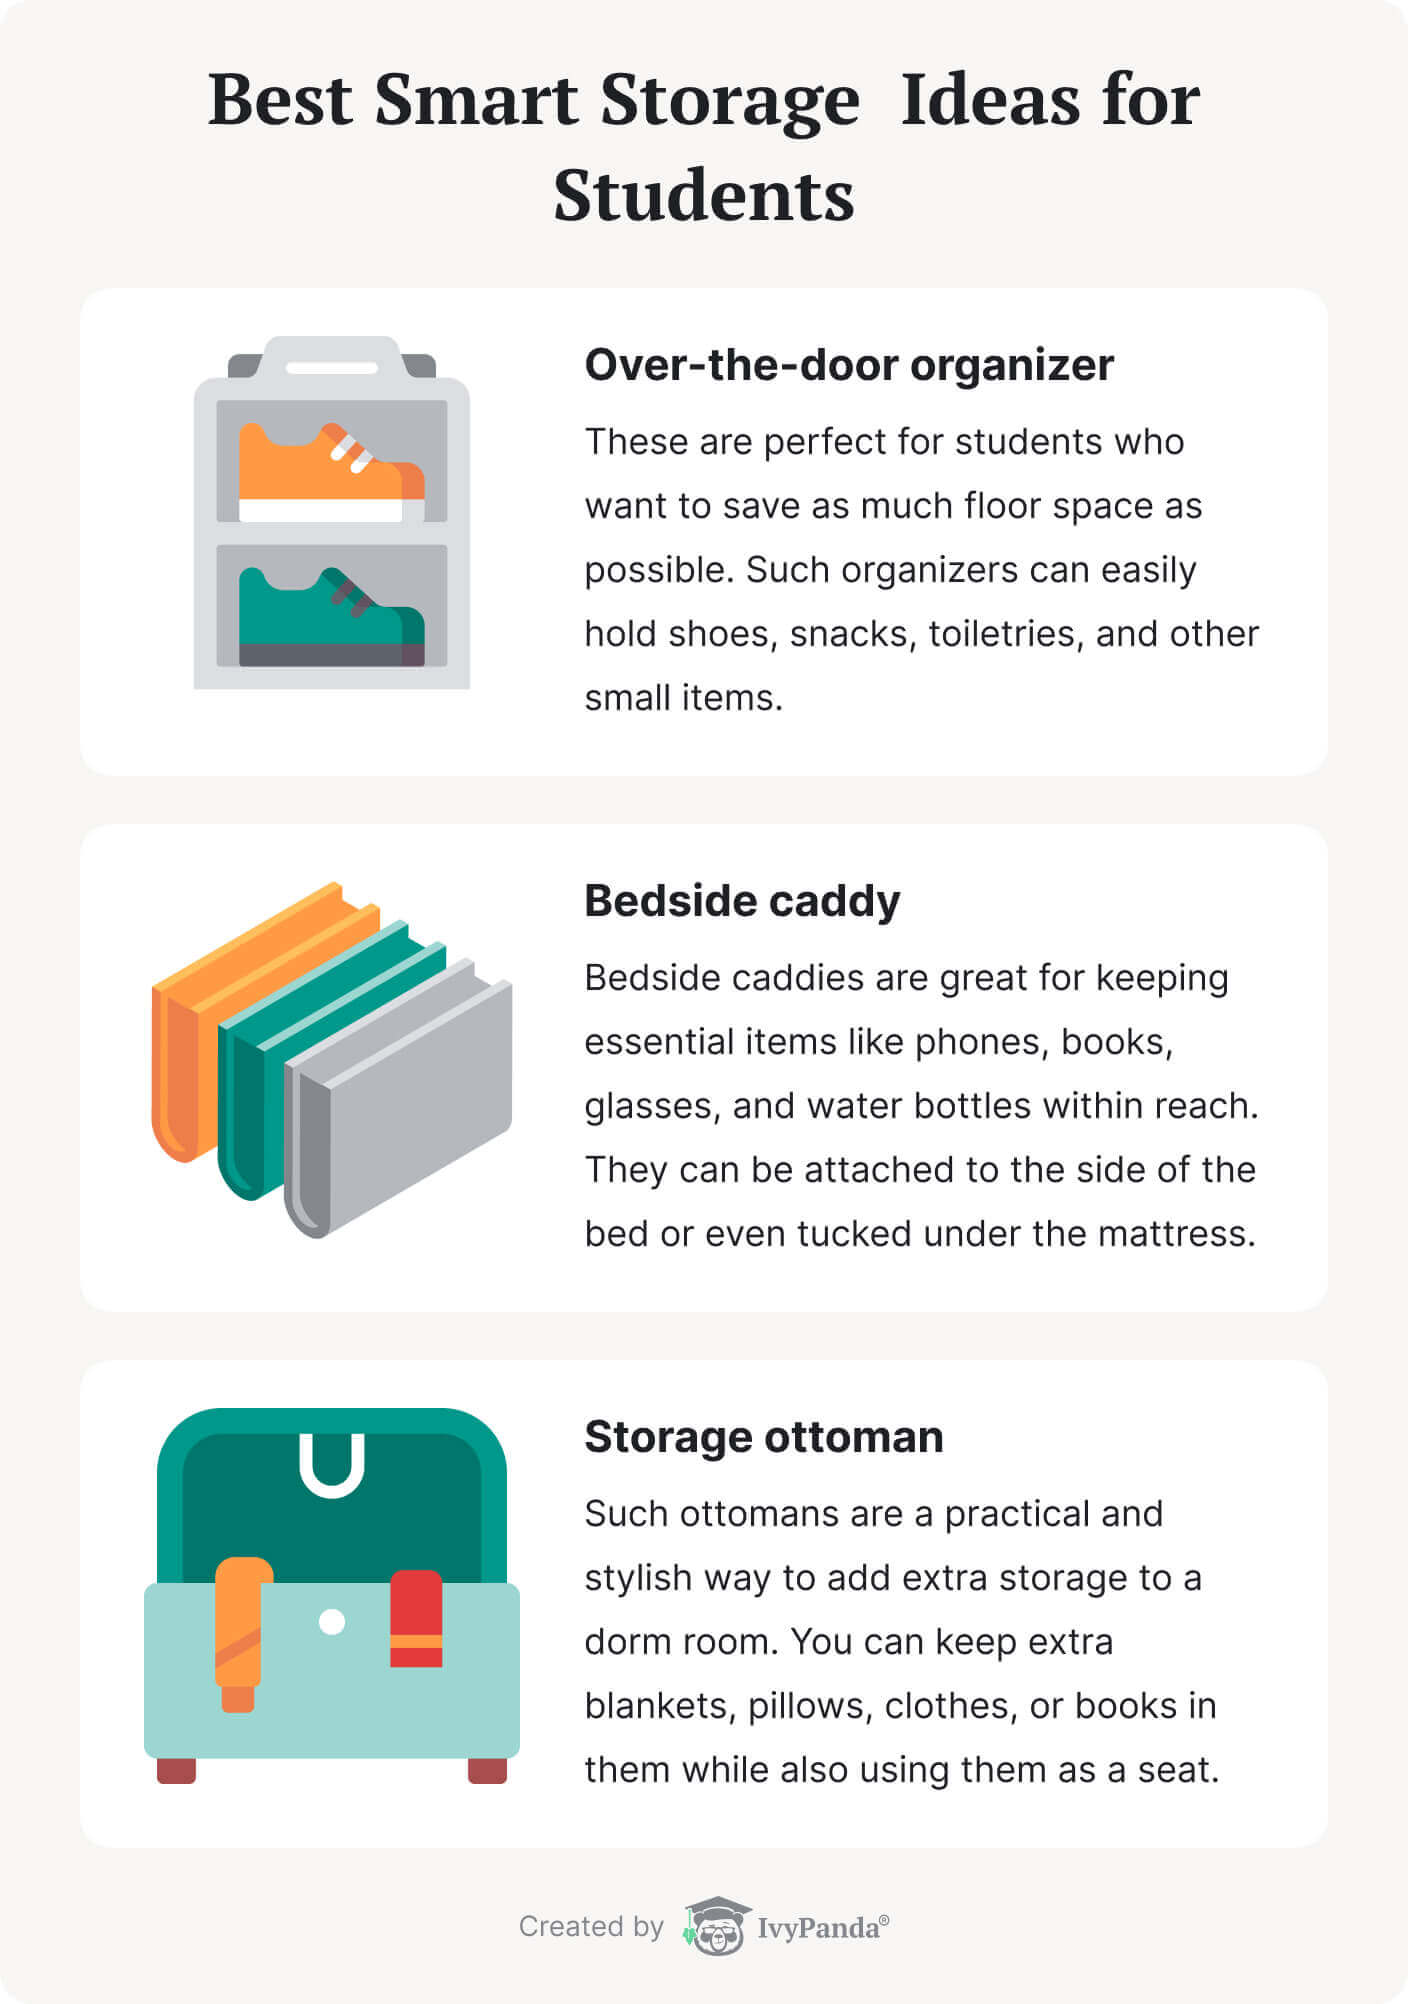 The picture enumerates some of the best smart storage ideas for students.